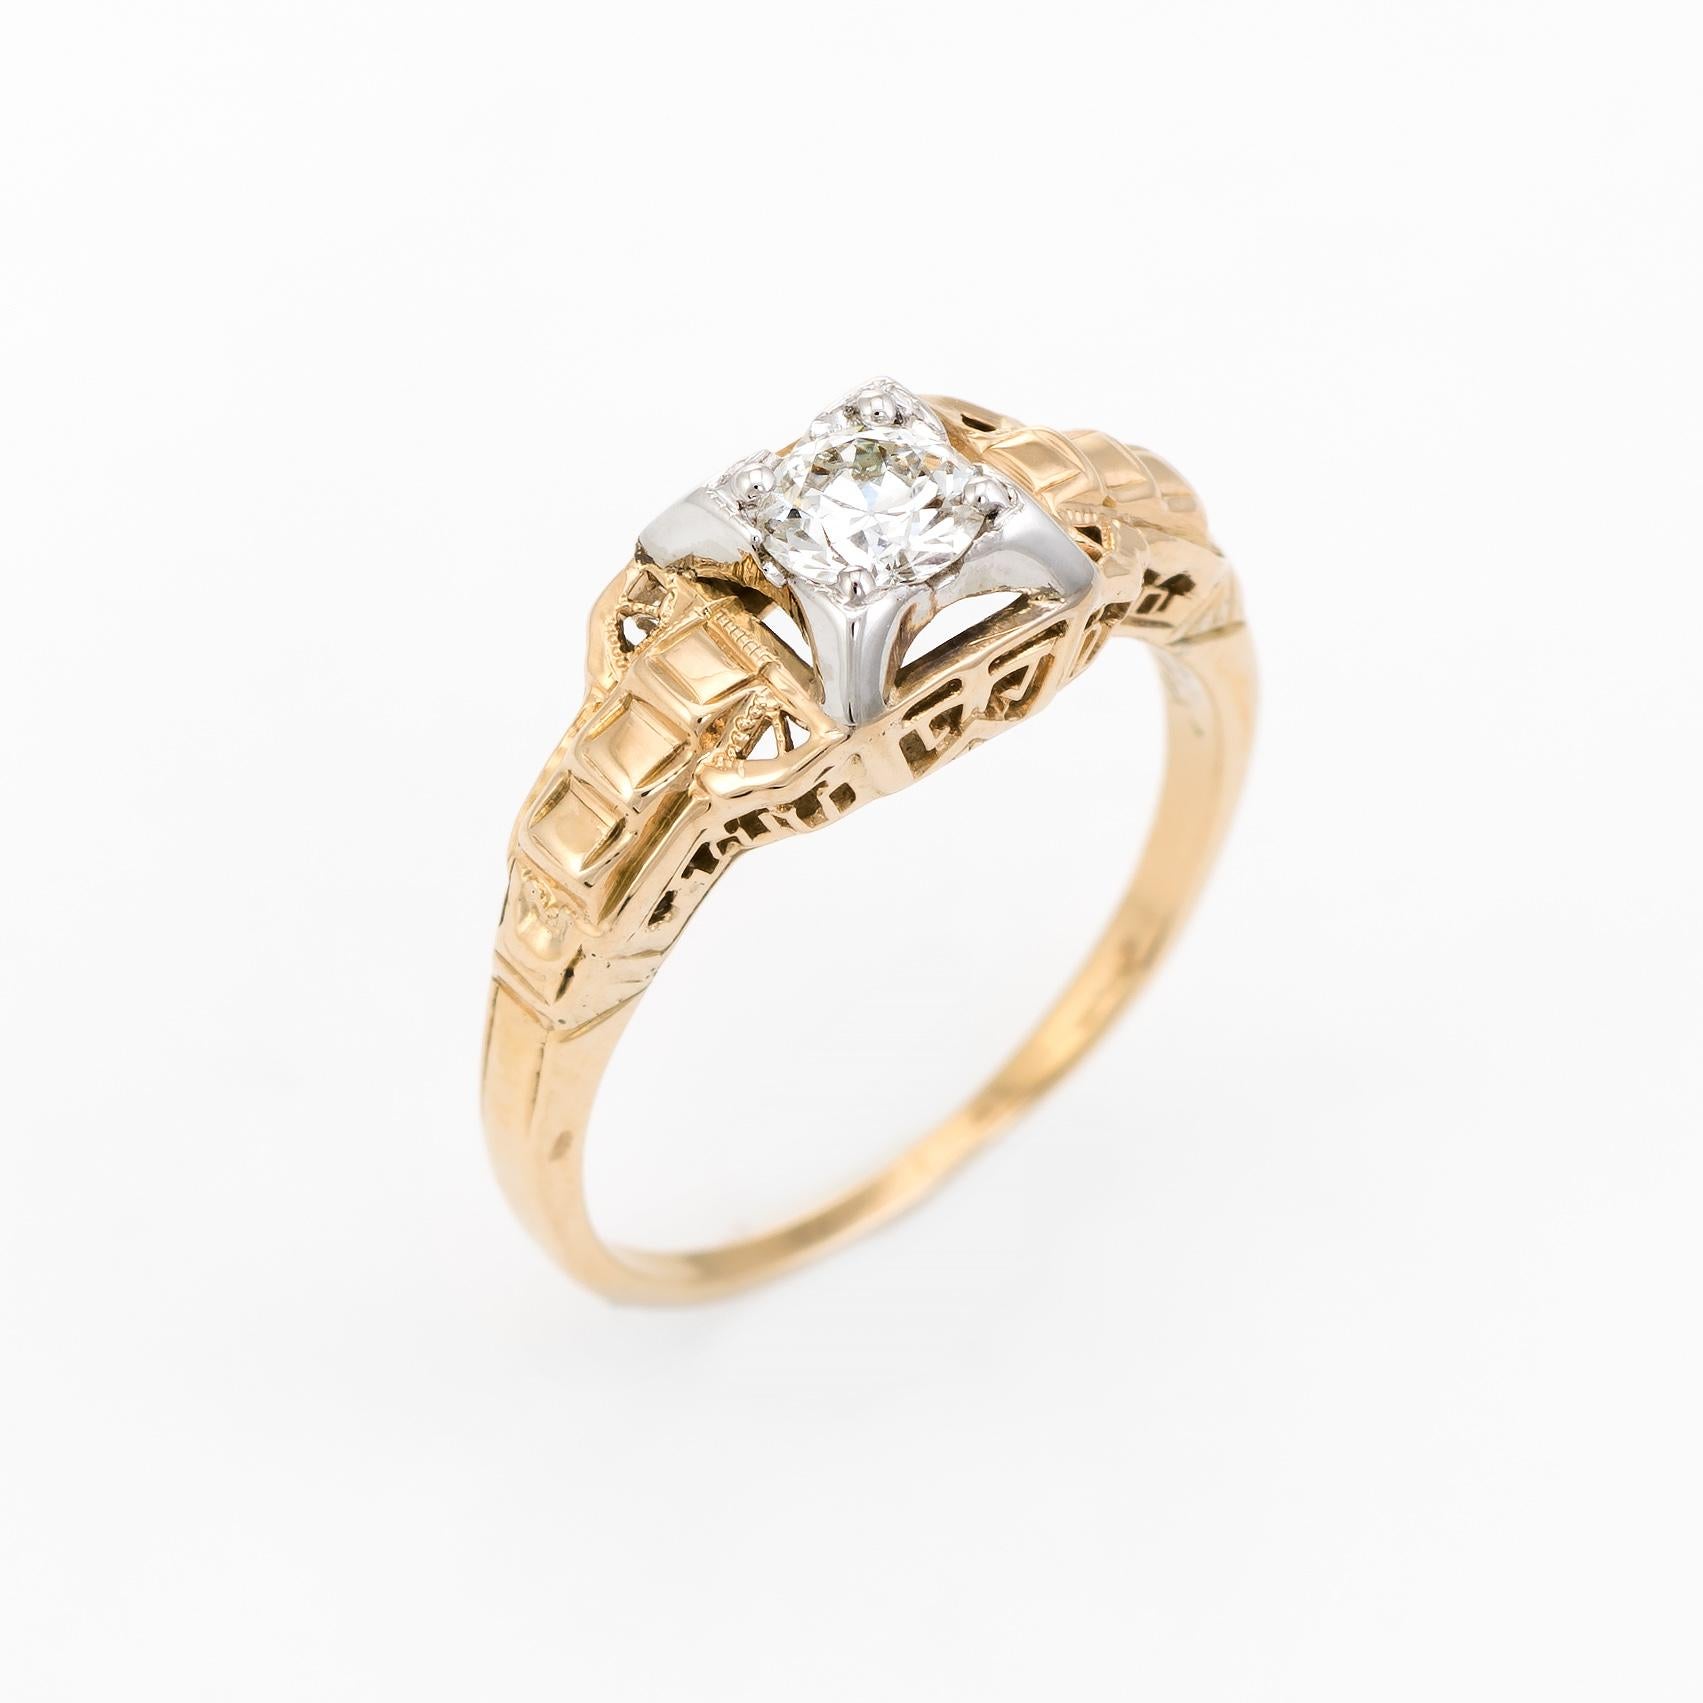 Finely detailed vintage Art Deco era engagement ring (circa 1920s to 1930s), crafted in two tone 14 karat yellow & white gold. 

Centrally mounted estimated 0.33 carat old European cut diamond is estimated at H-I color and VS2 clarity. 

Elegant and